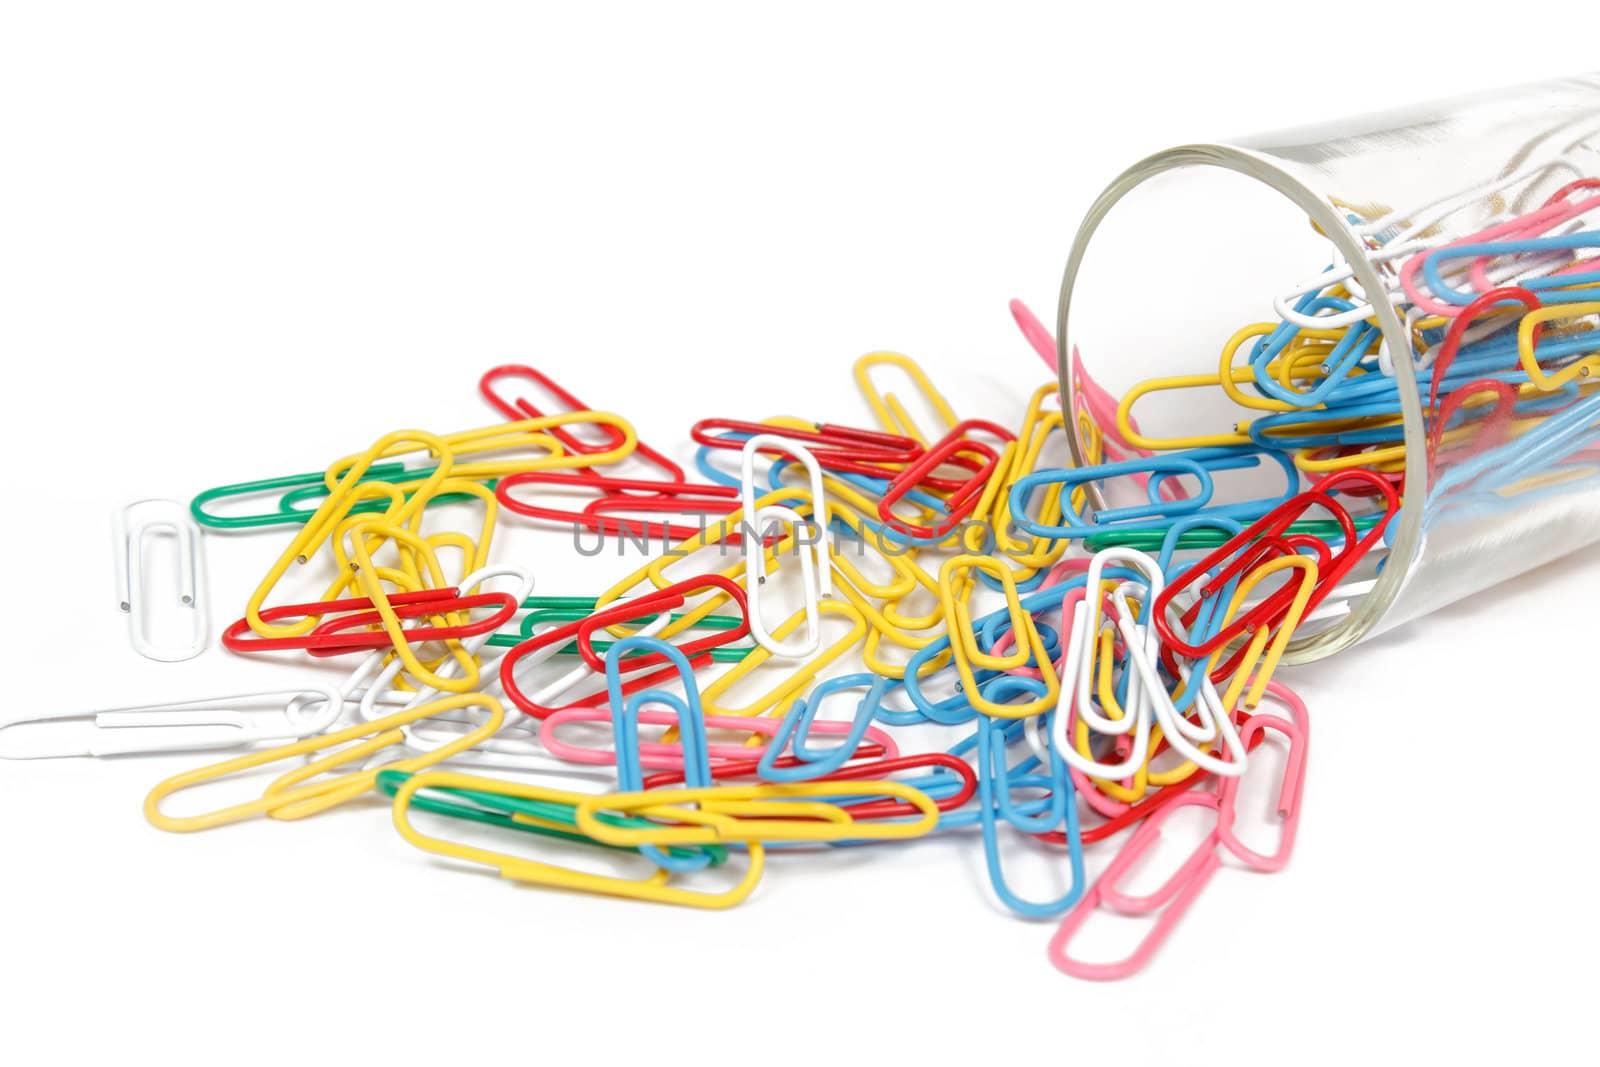 color paperclip spilled on the white background